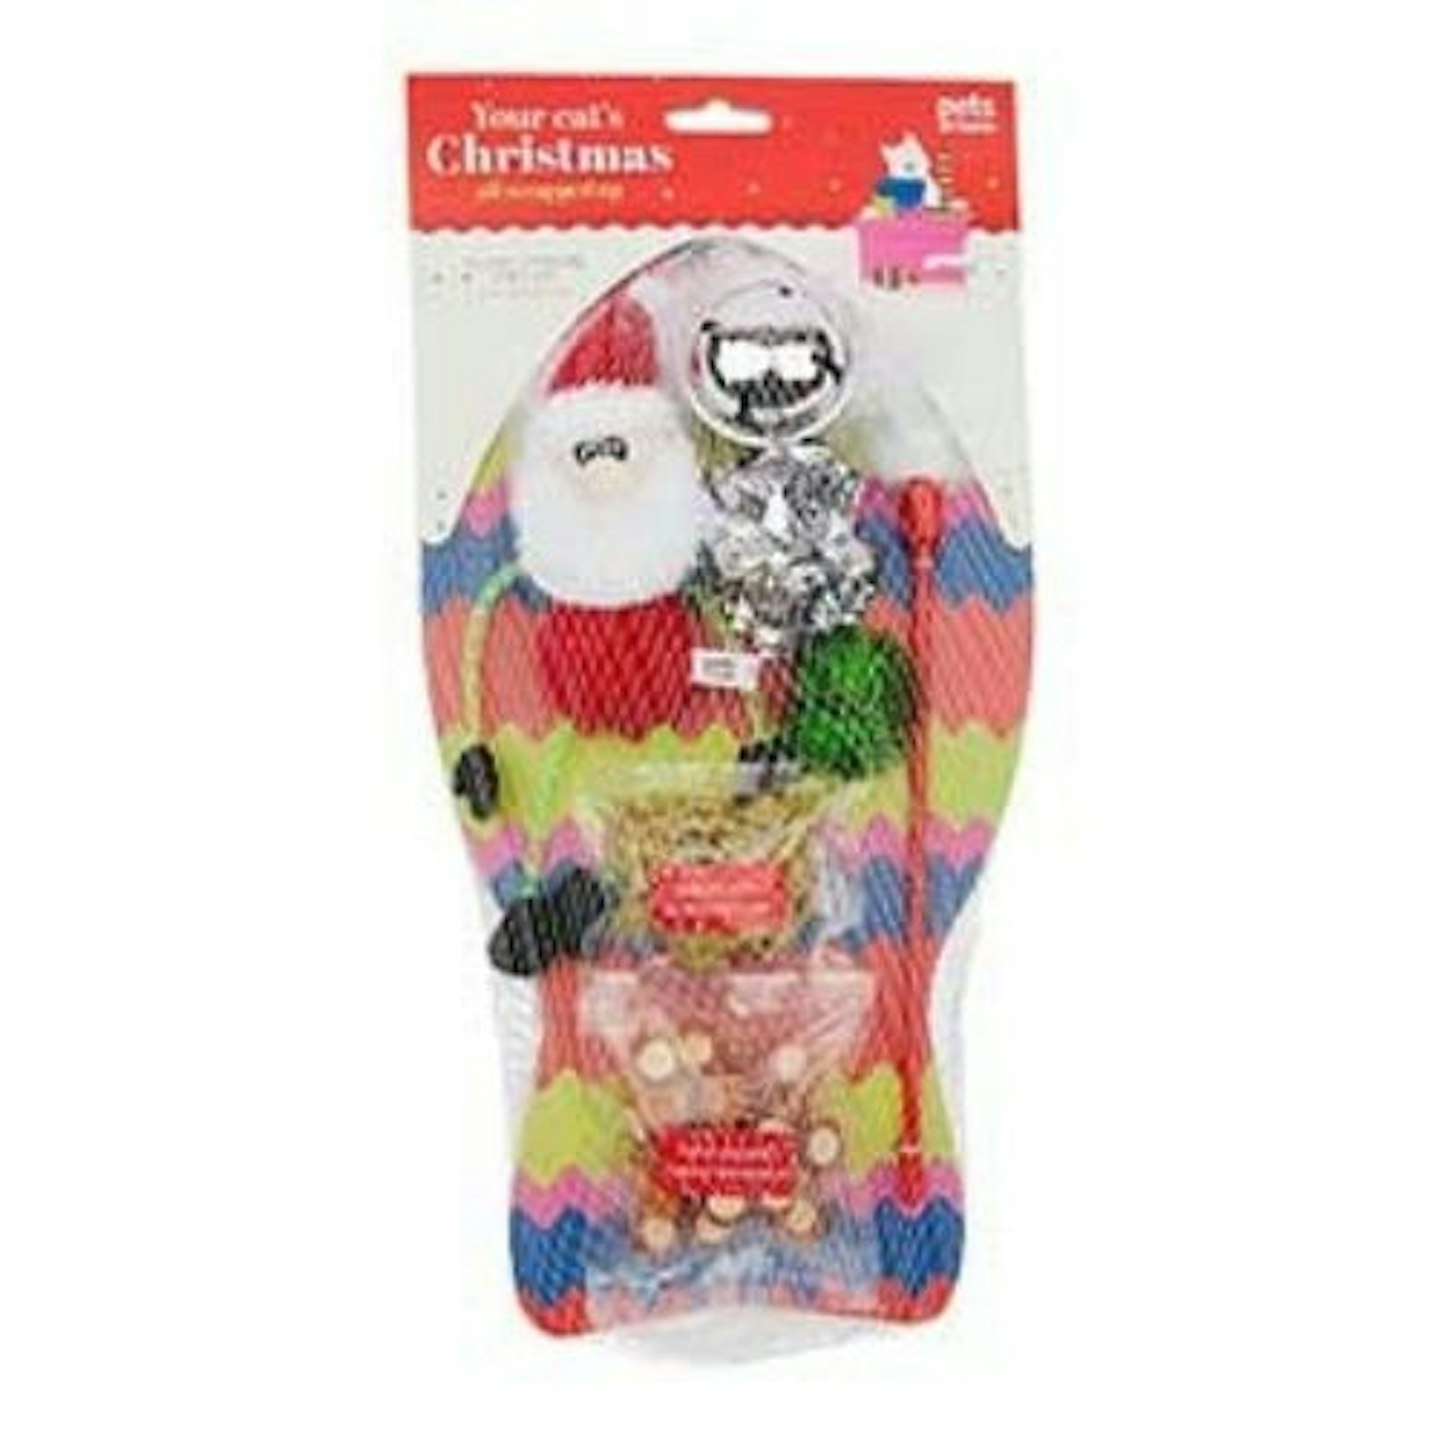 Pets at Home Christmas 7 Piece Toys and Treats Festive Cat Stocking